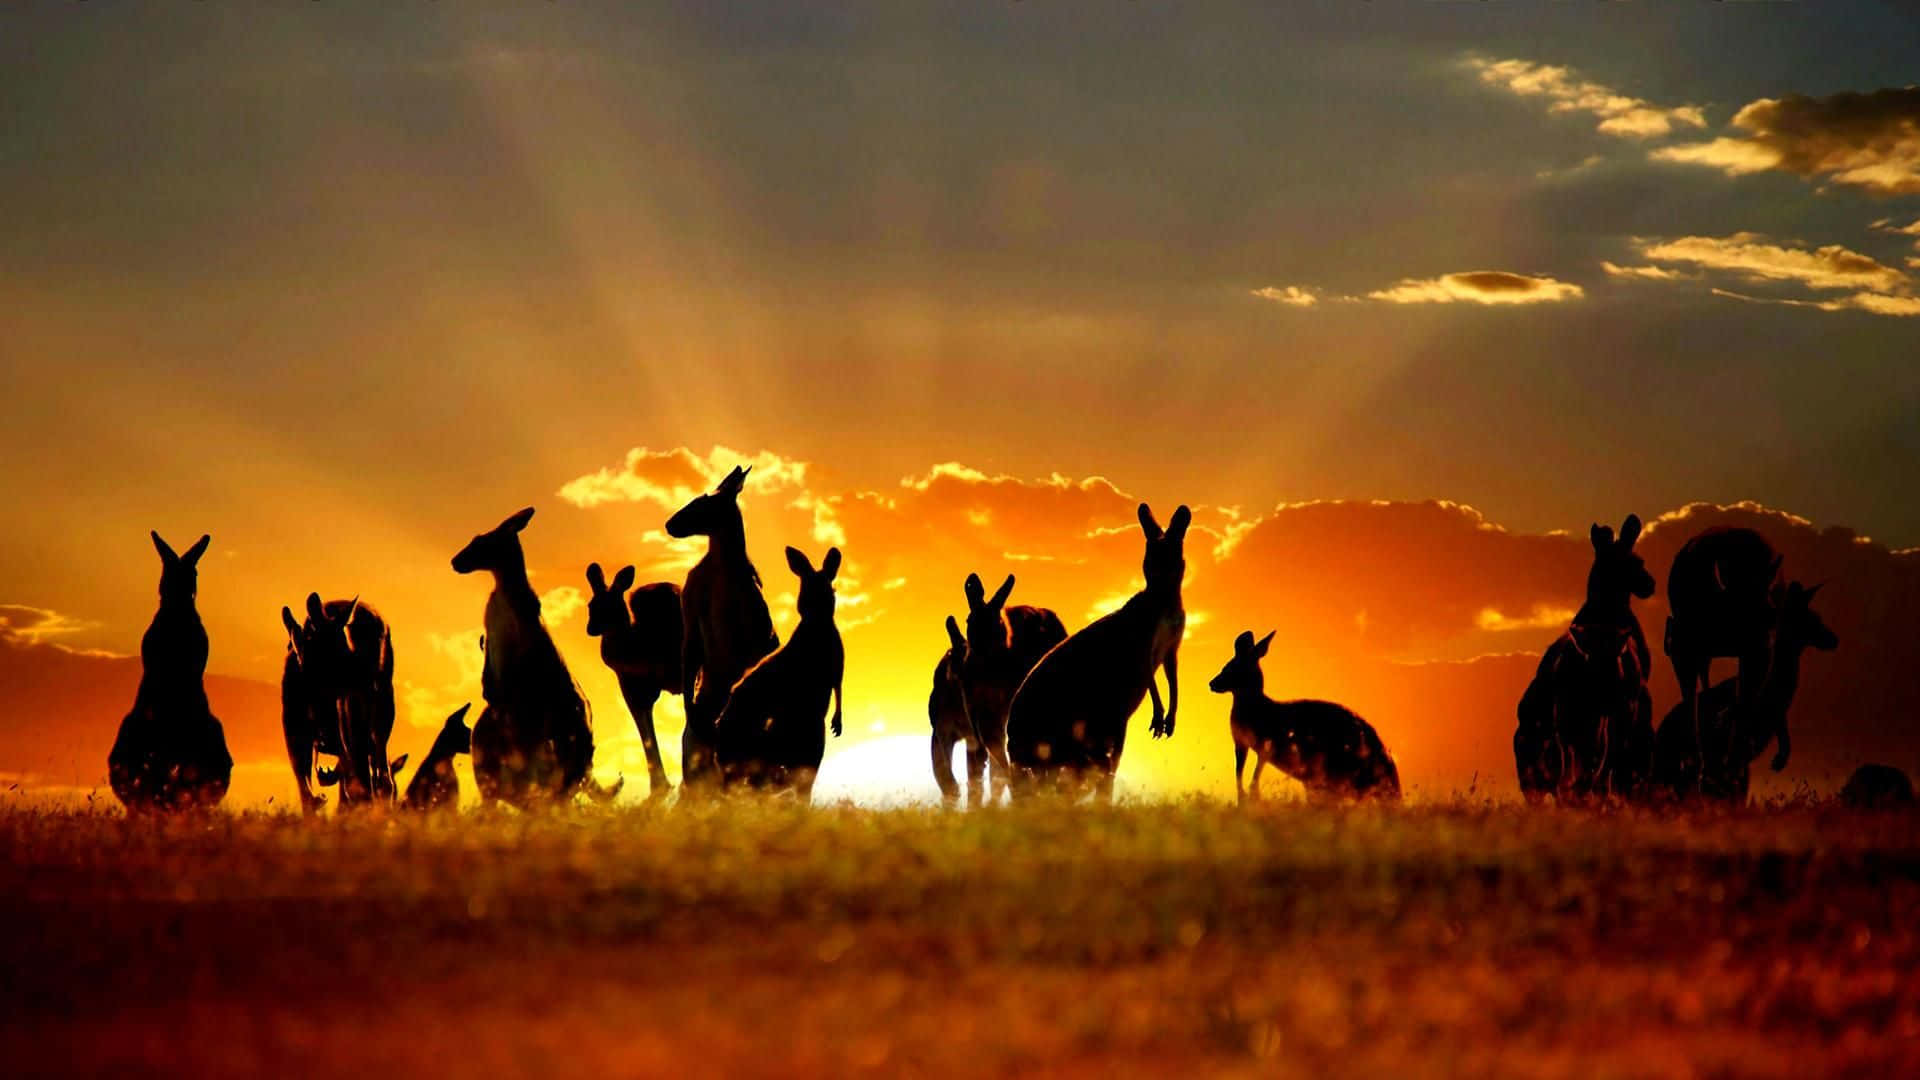 Take a journey through the picturesque Australian Outback